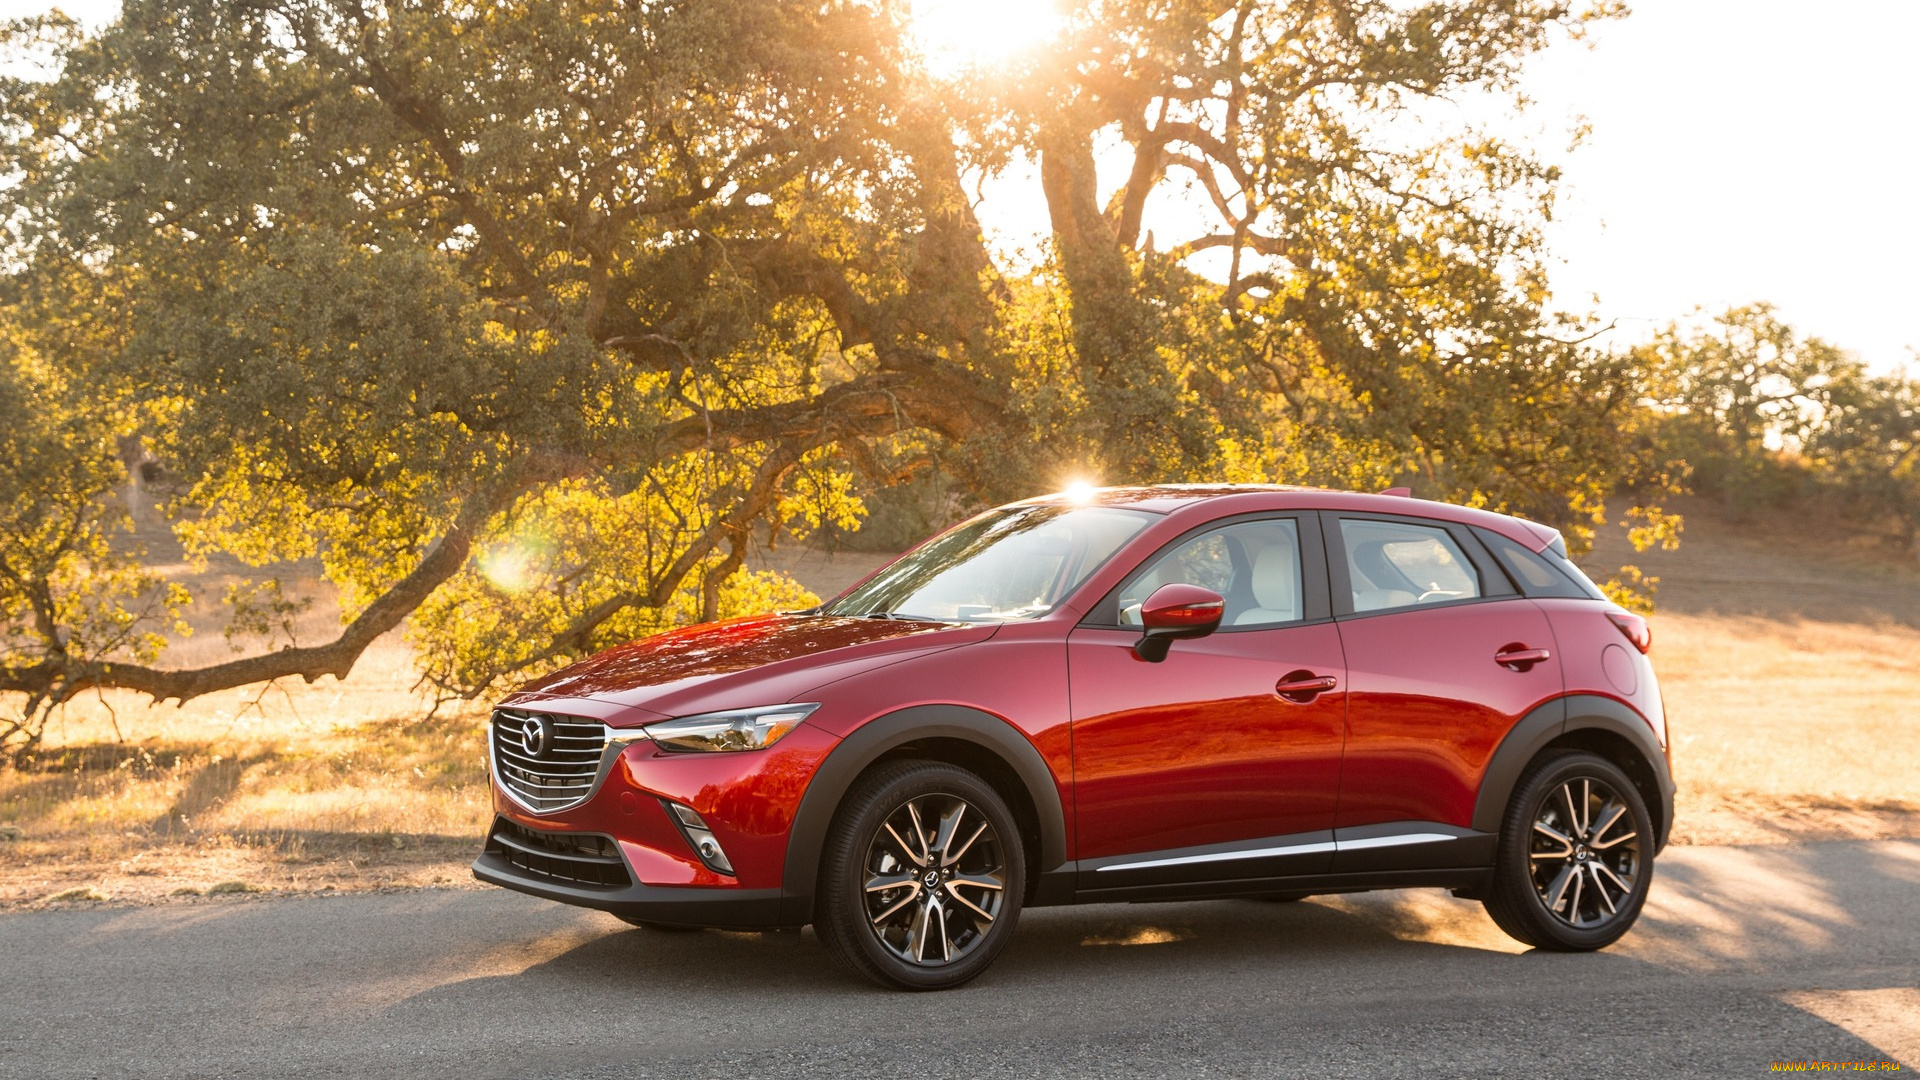 mazda, cx-3, review, subcompact, crossover, 2018, автомобили, mazda, 2018, crossover, cx-3, review, subcompact, red